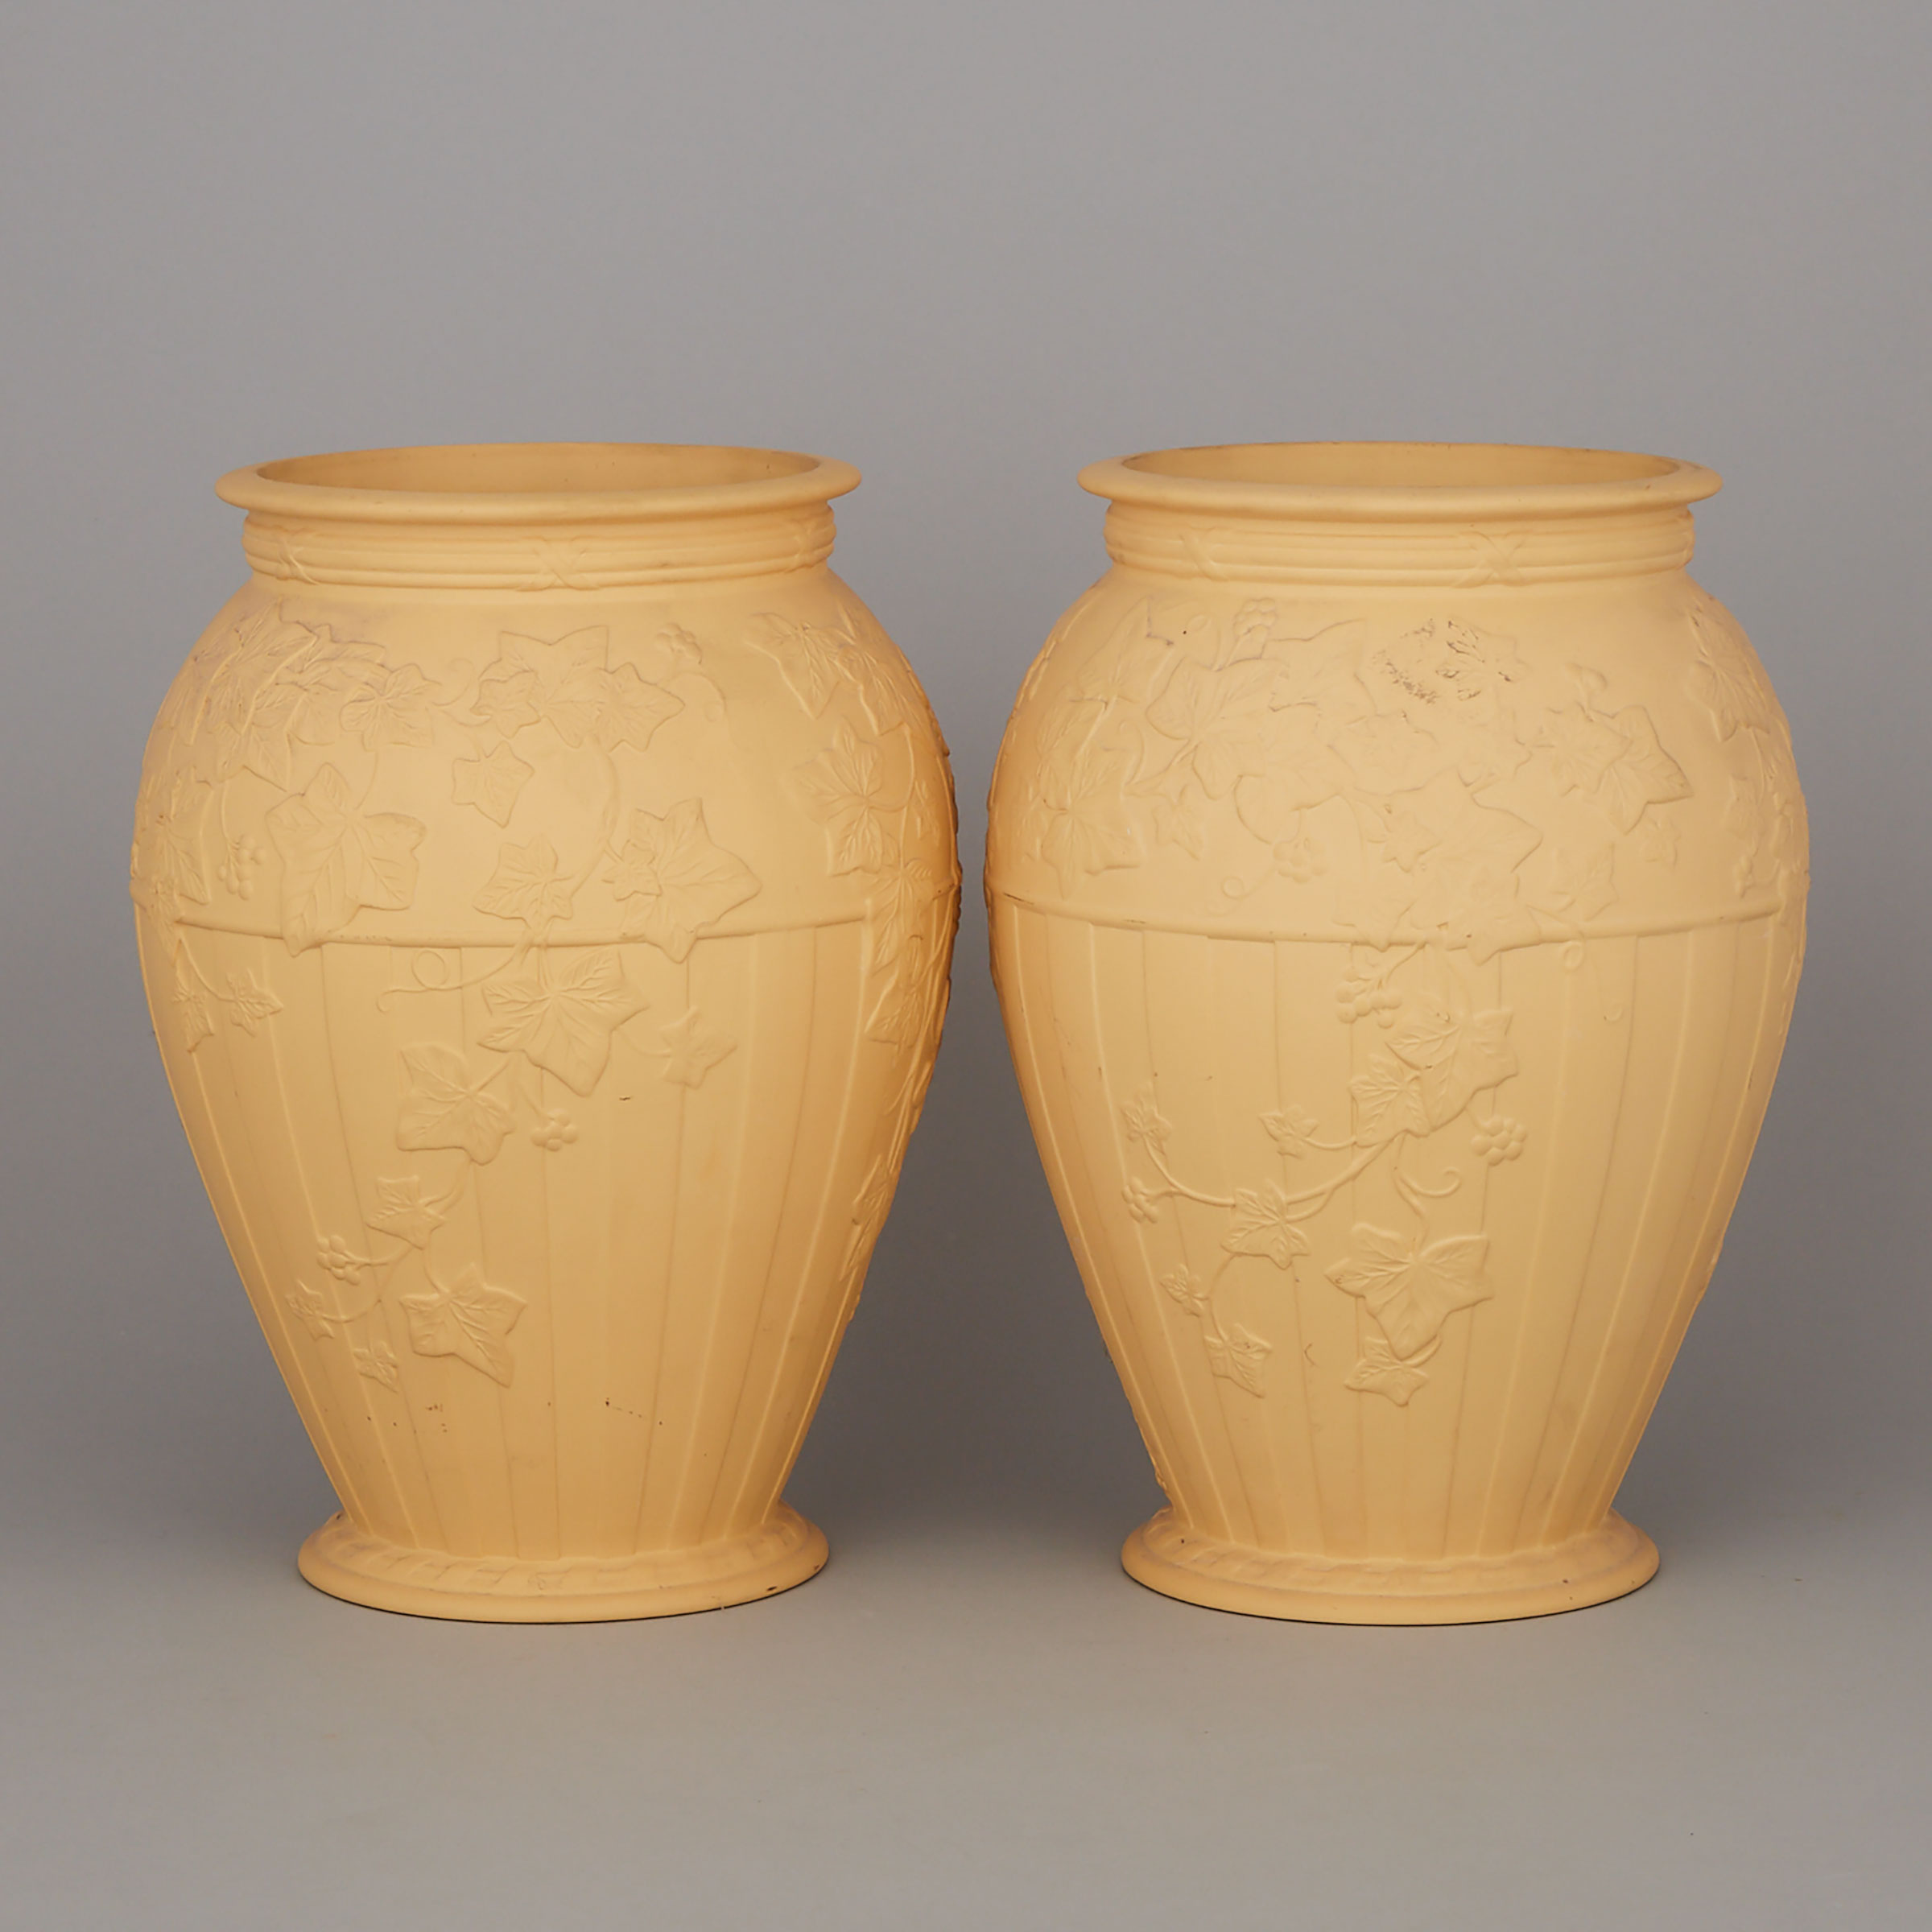 Pair of Wedgwood Cane Ware Vases, 20th century